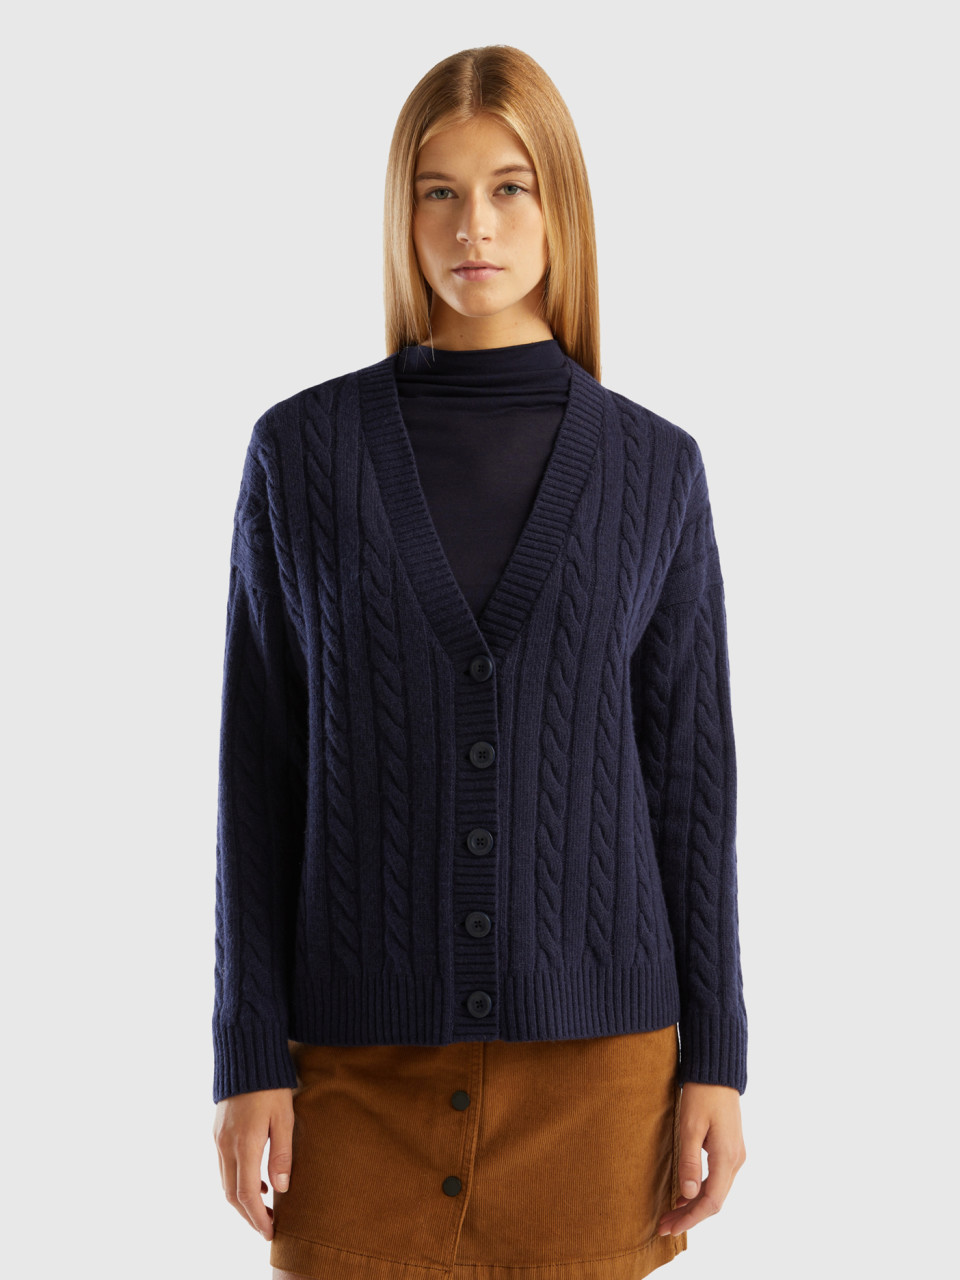 Benetton, Oversized Fit Cardigan With Cables, Dark Blue, Women